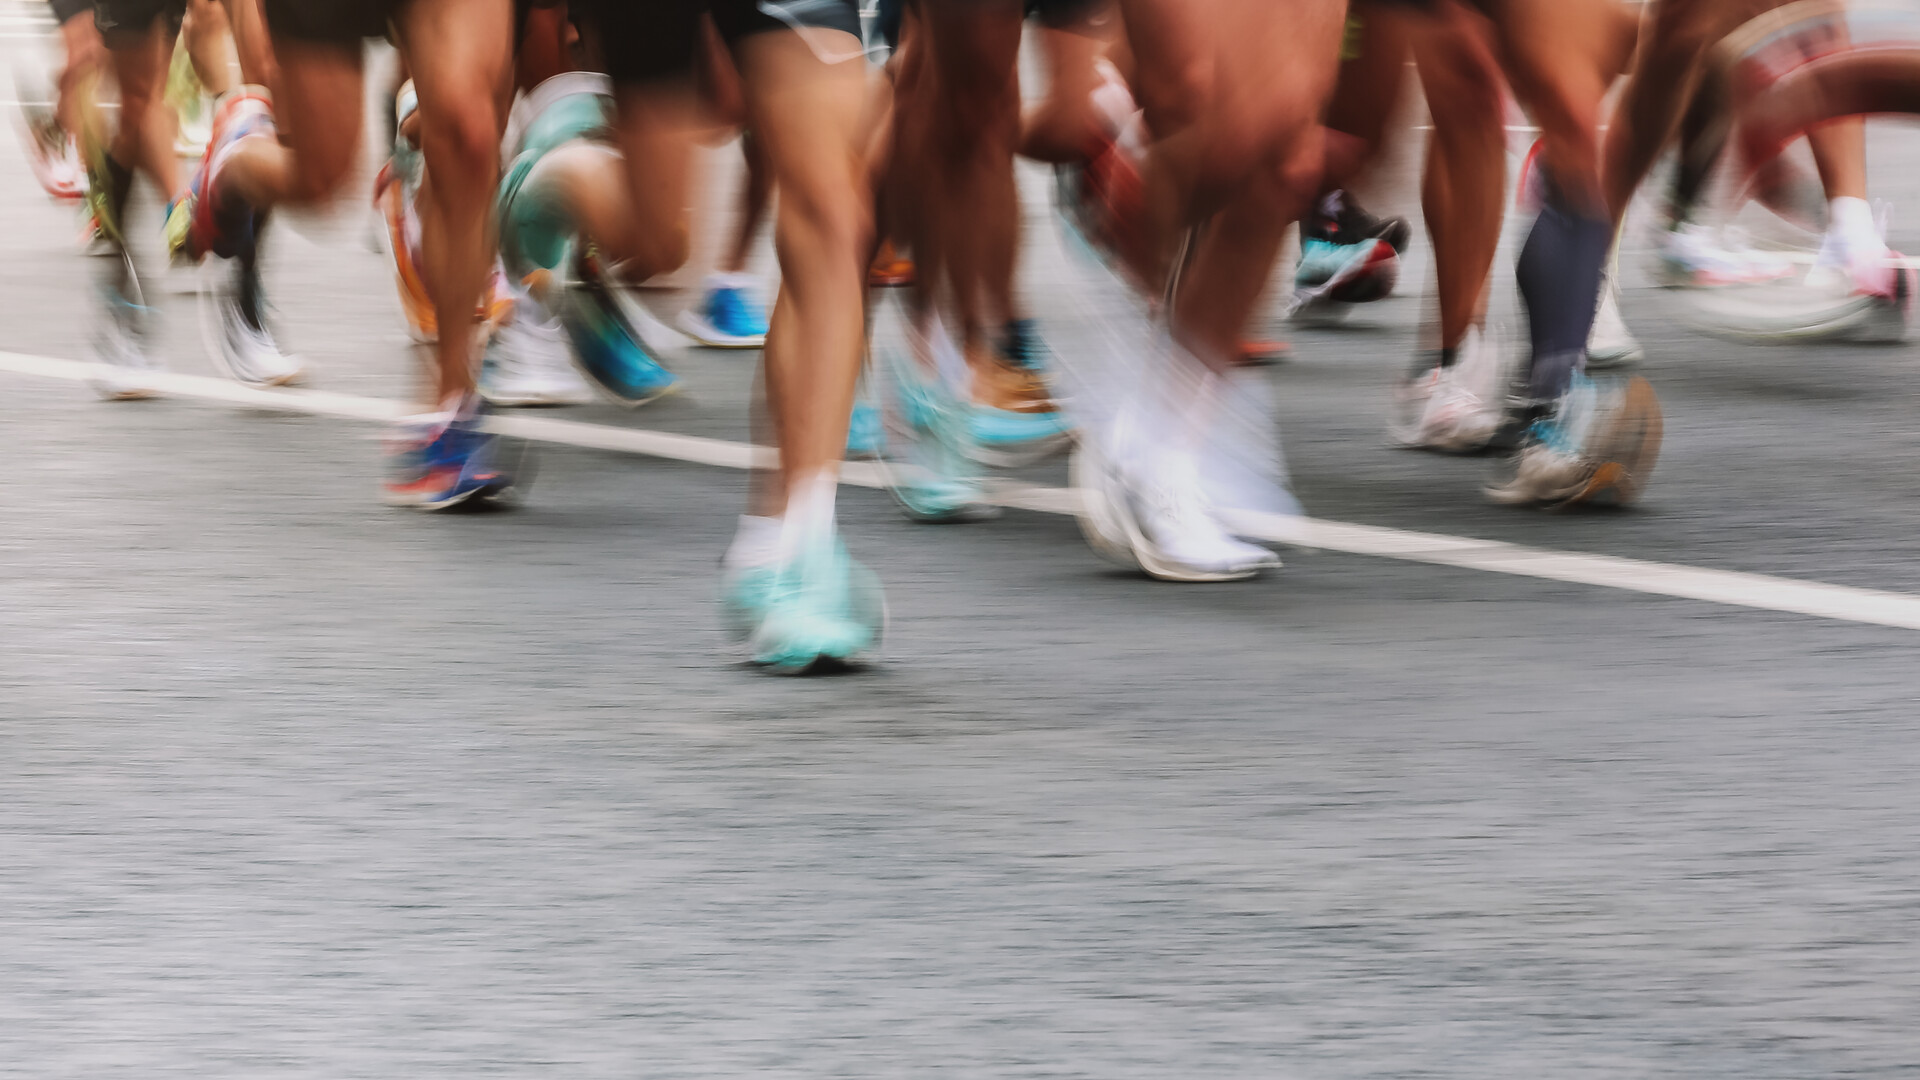 An image of several people's legs photographed in a running motion.